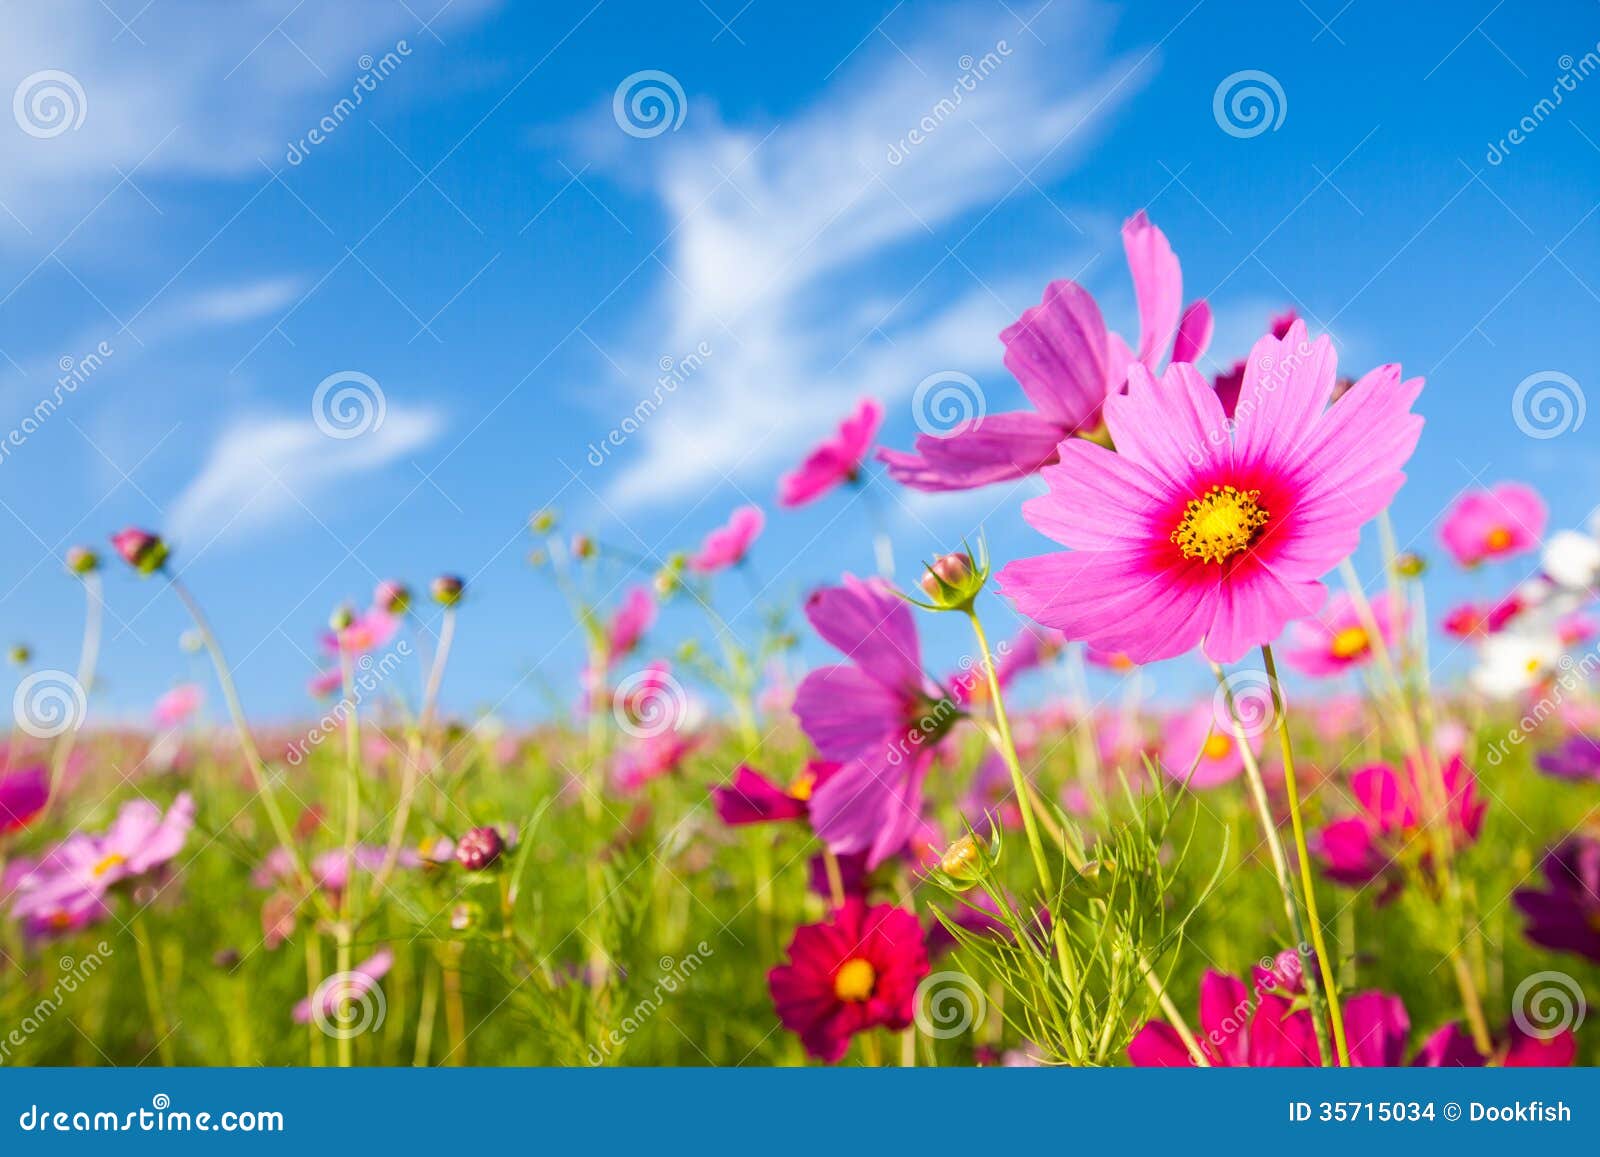 the cosmos flower field